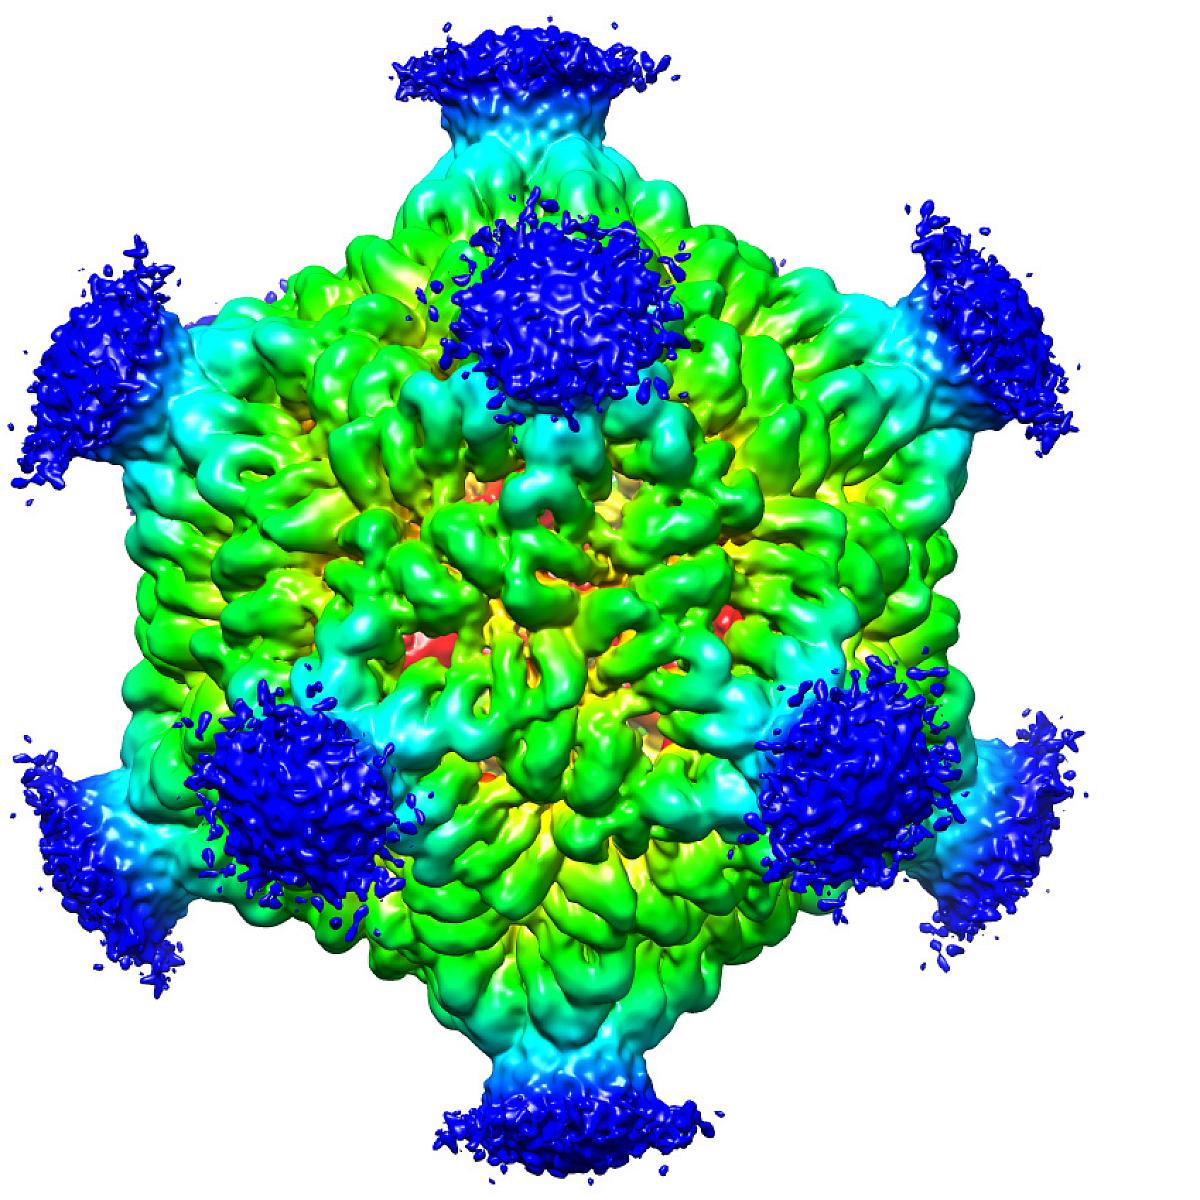 Three-dimensional structure of a PNMA2 complex, which can trigger a dangerous immune reaction when released by tumor cells